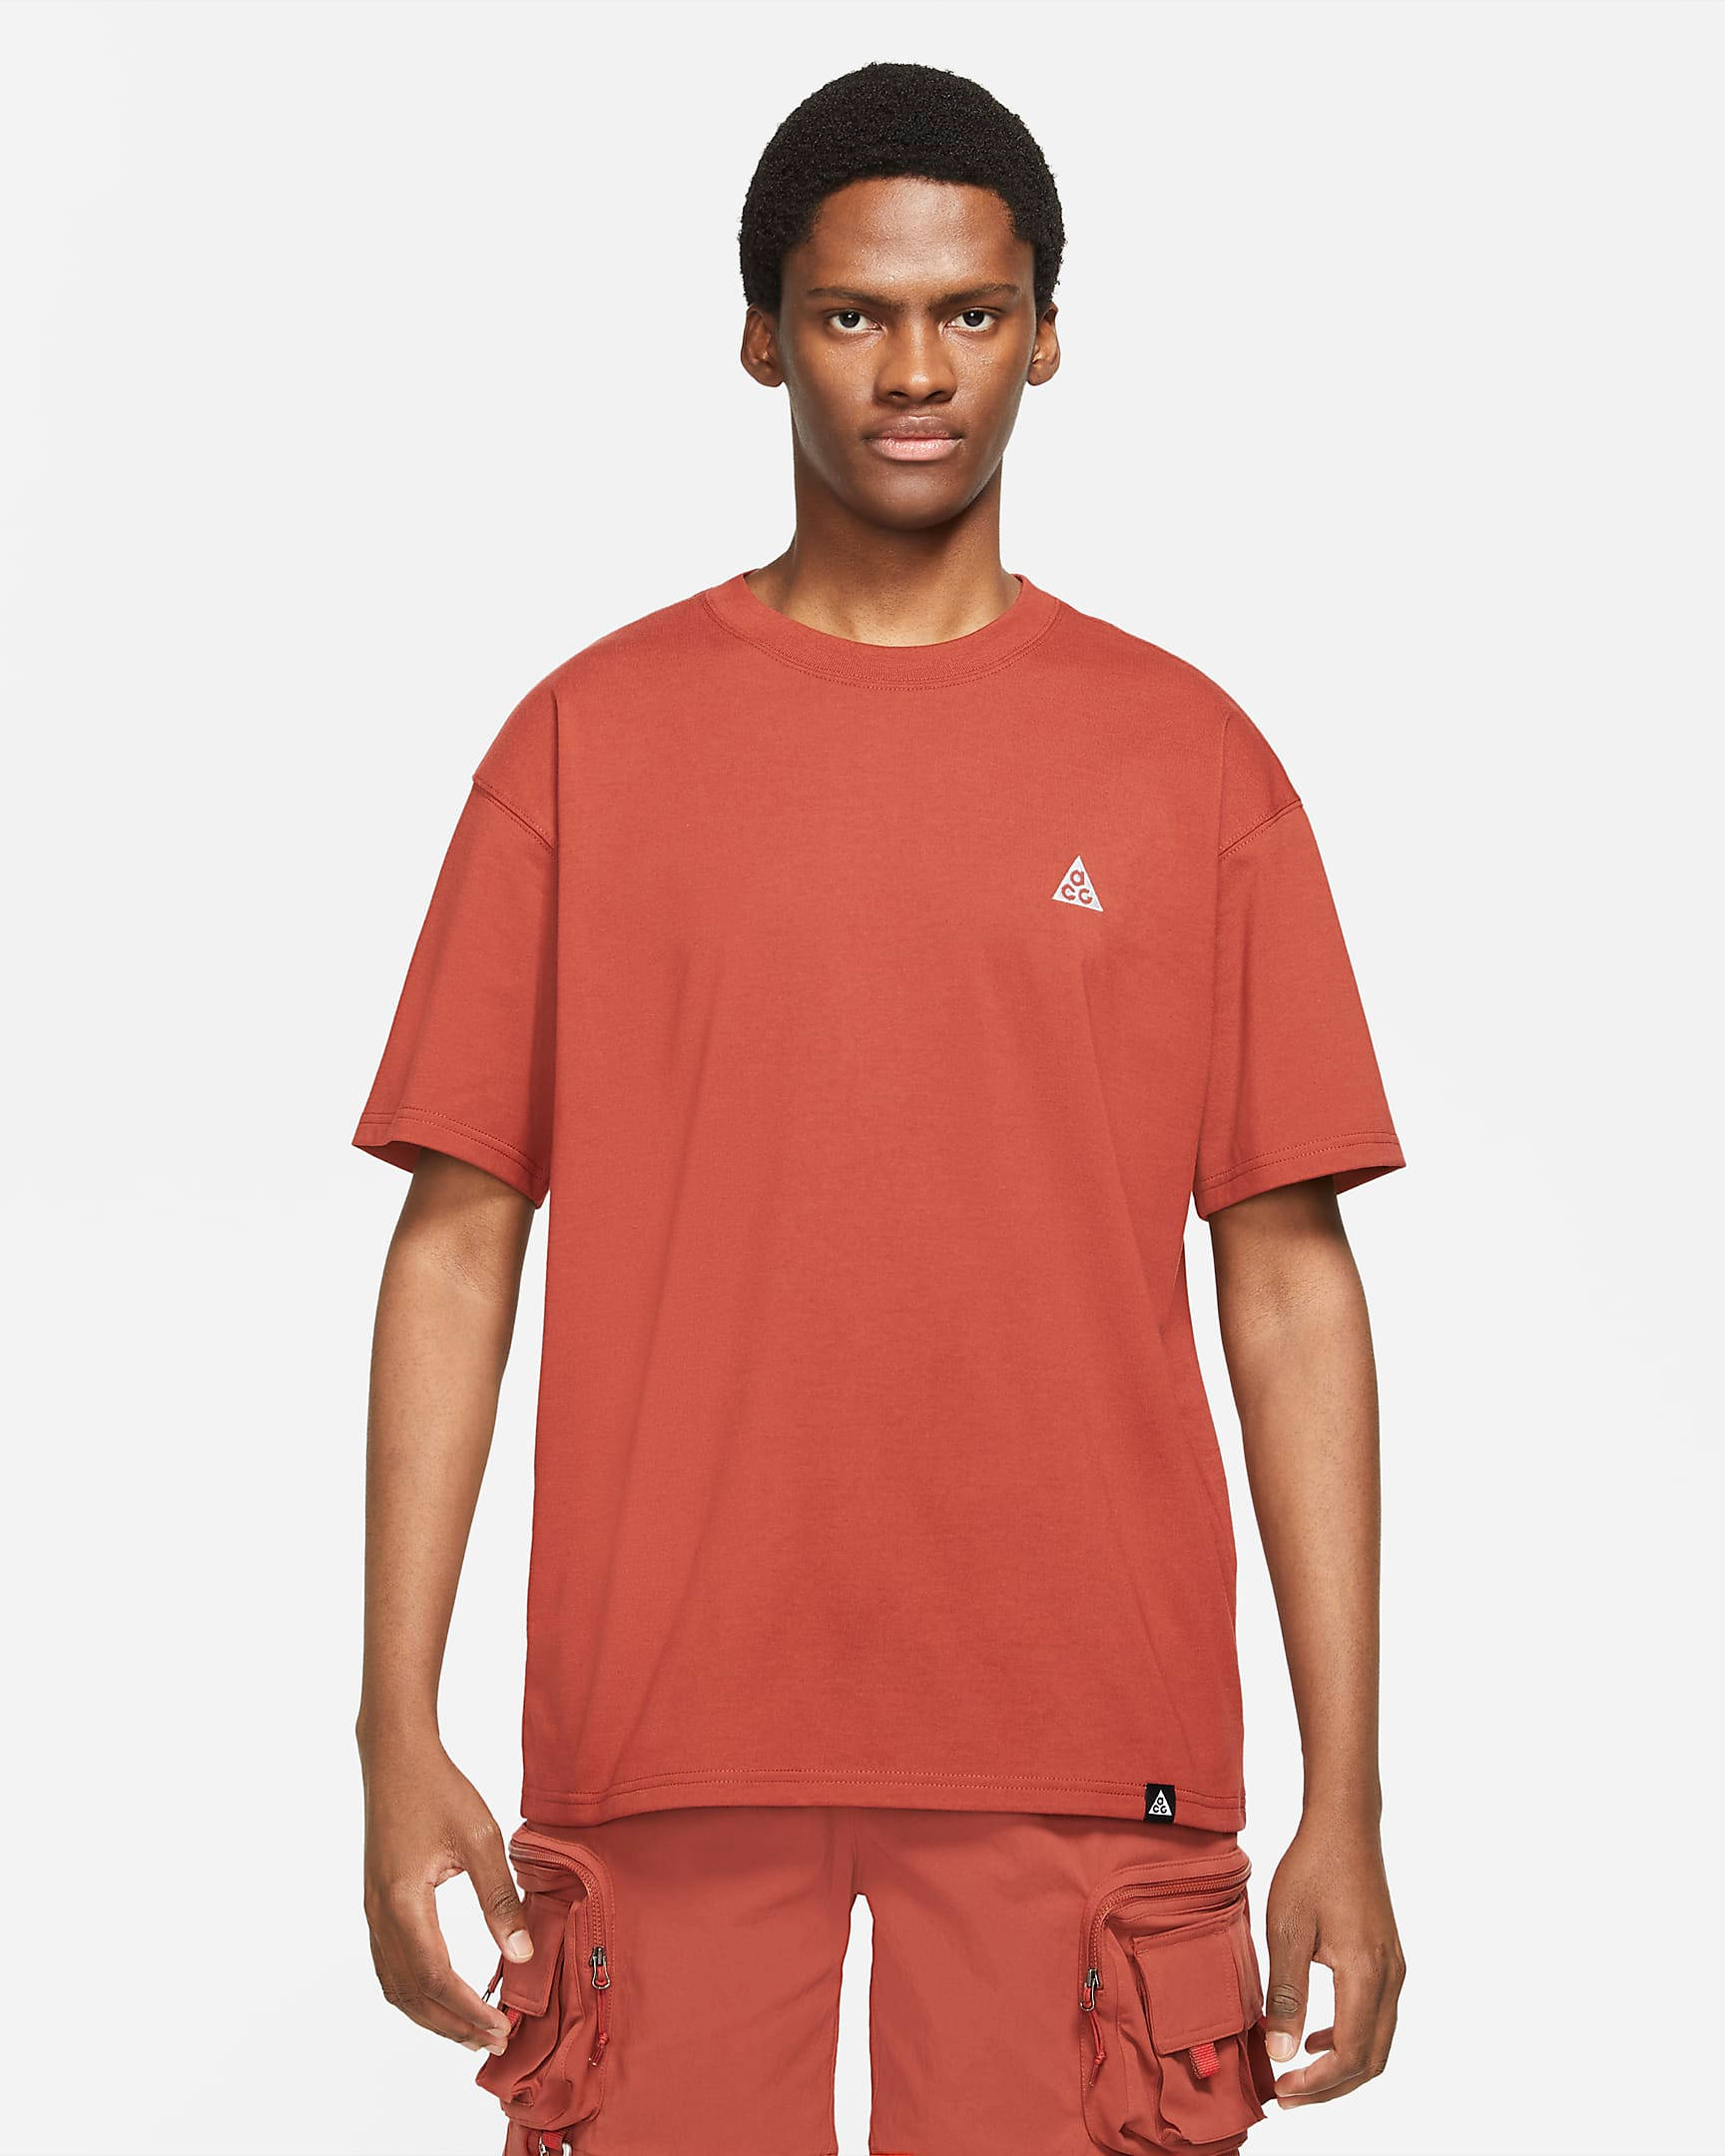 Nike ACG T-Shirt - Redstone | The Sole Supplier